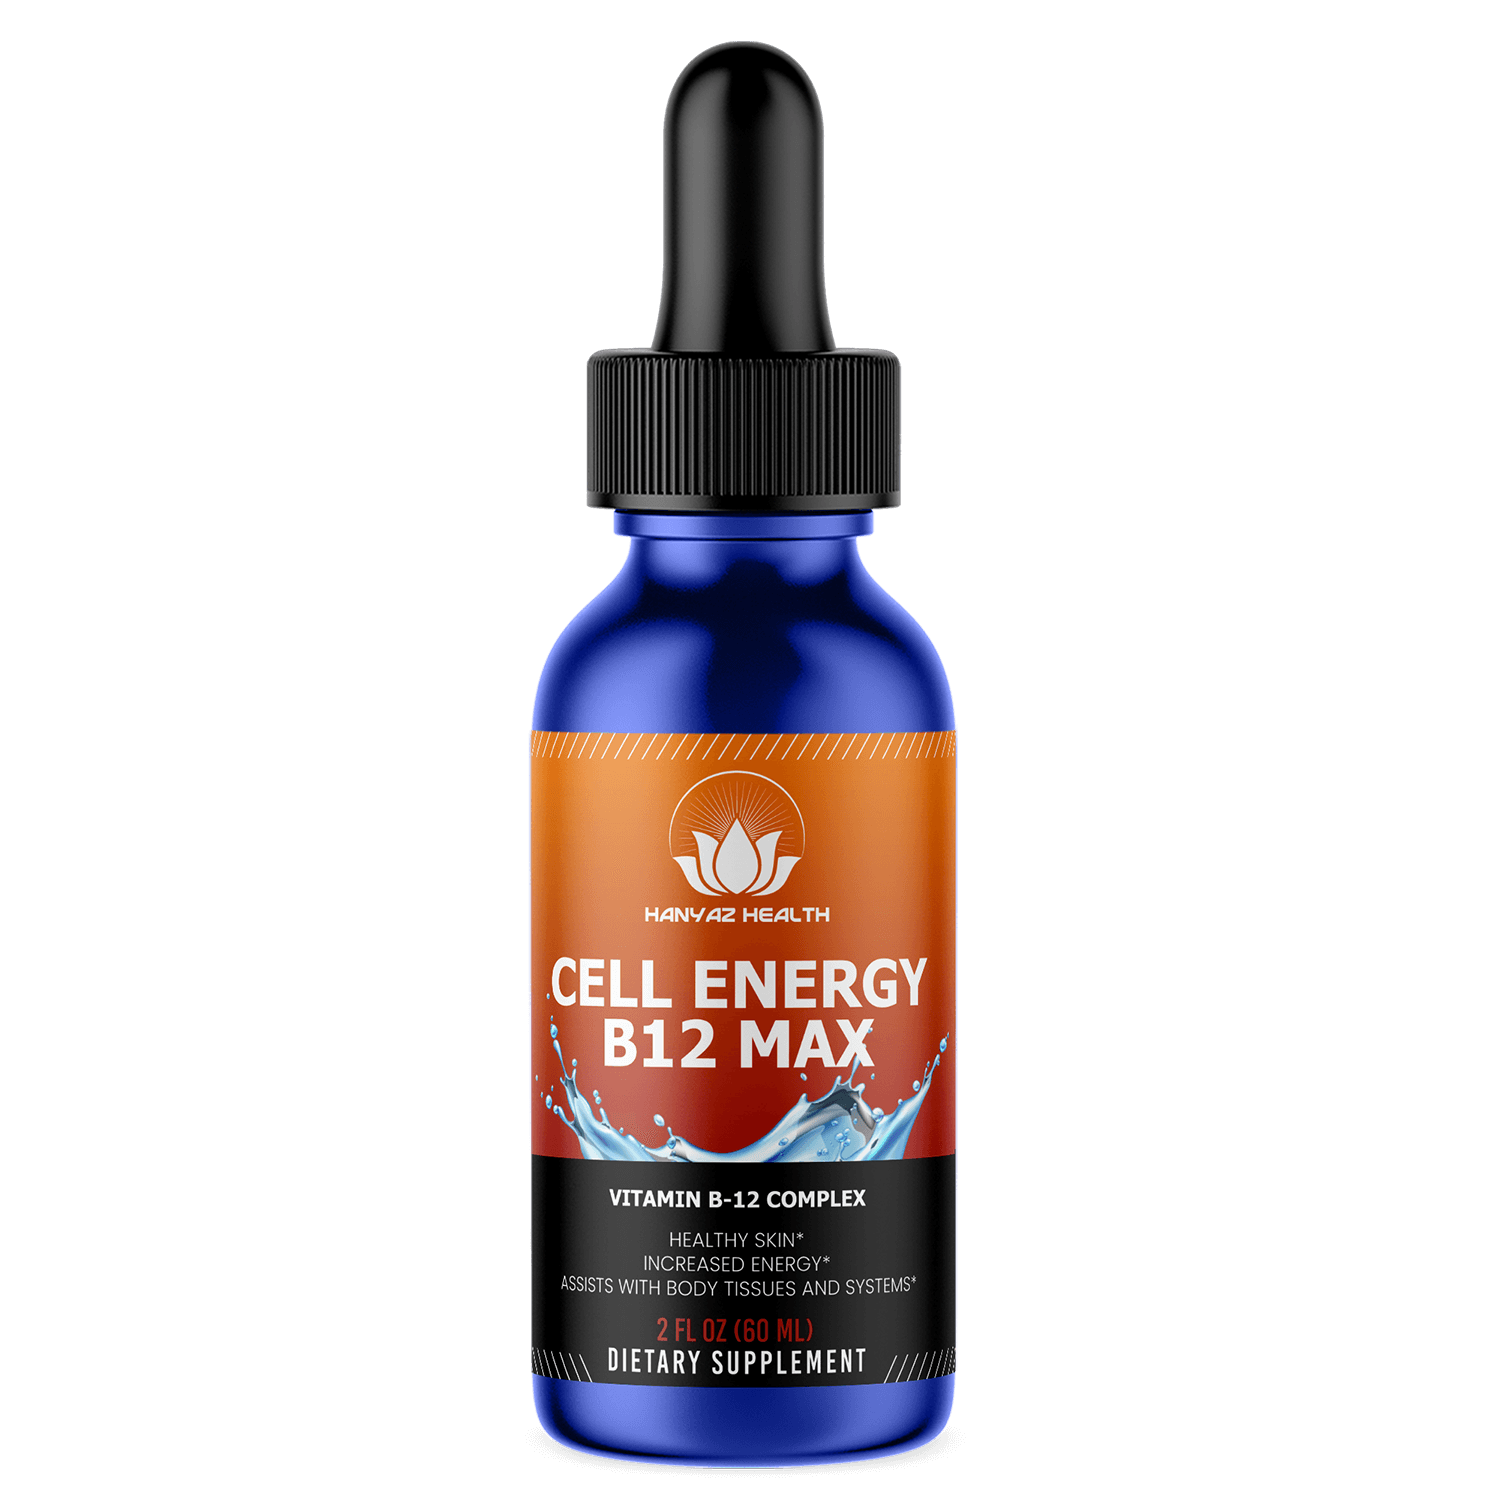 Cell Energy B12 Max